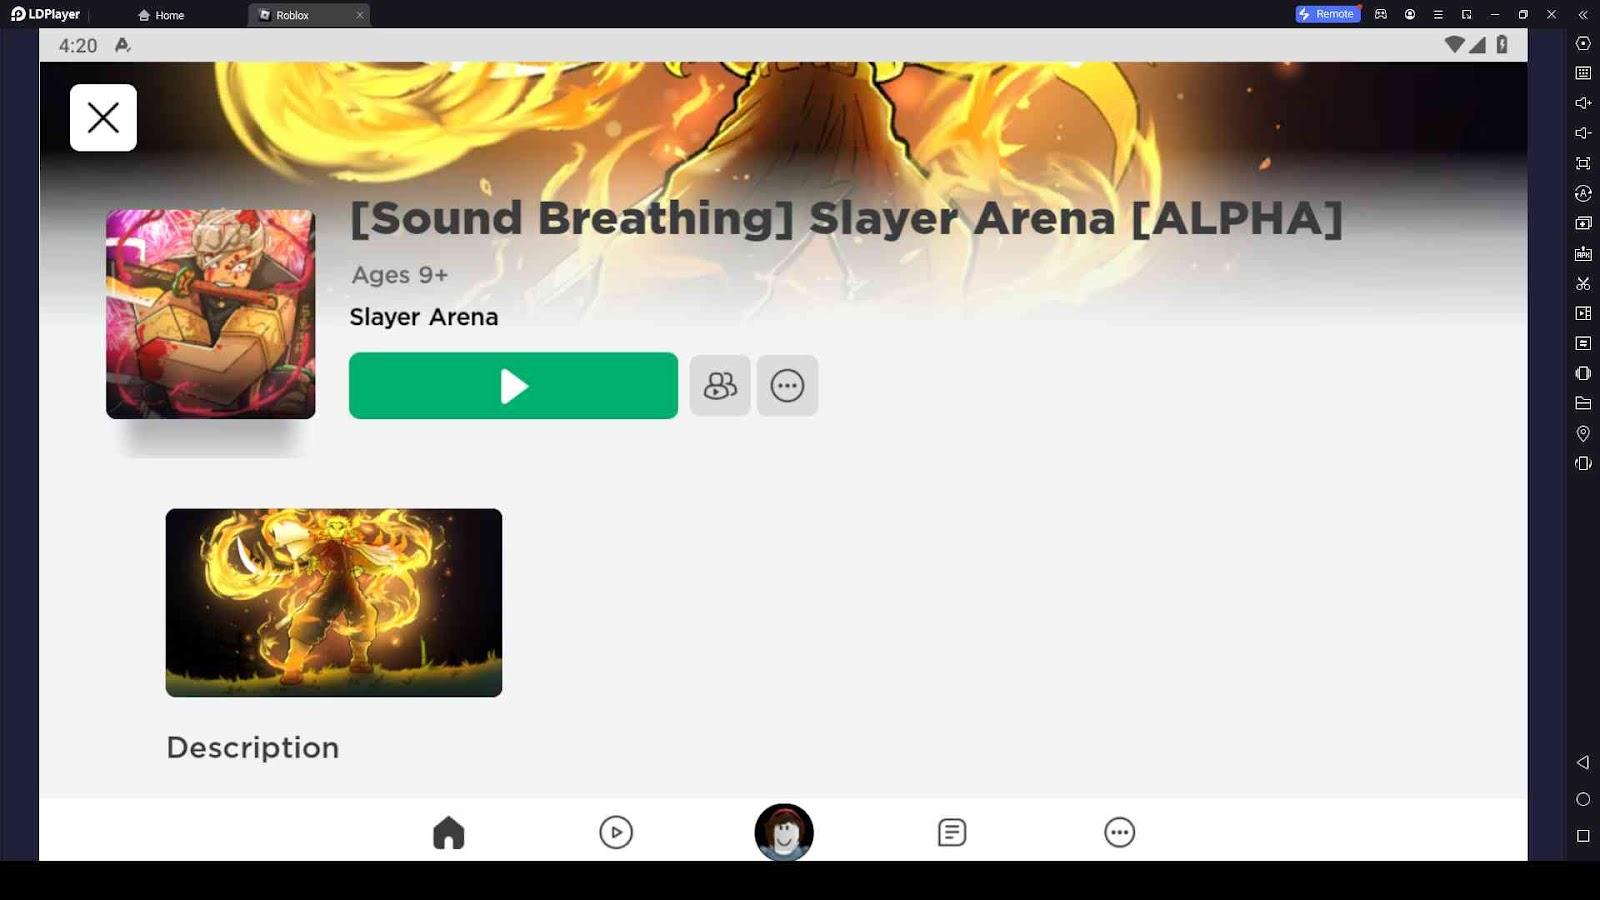 Playing Slayer Arena with LDPlayer